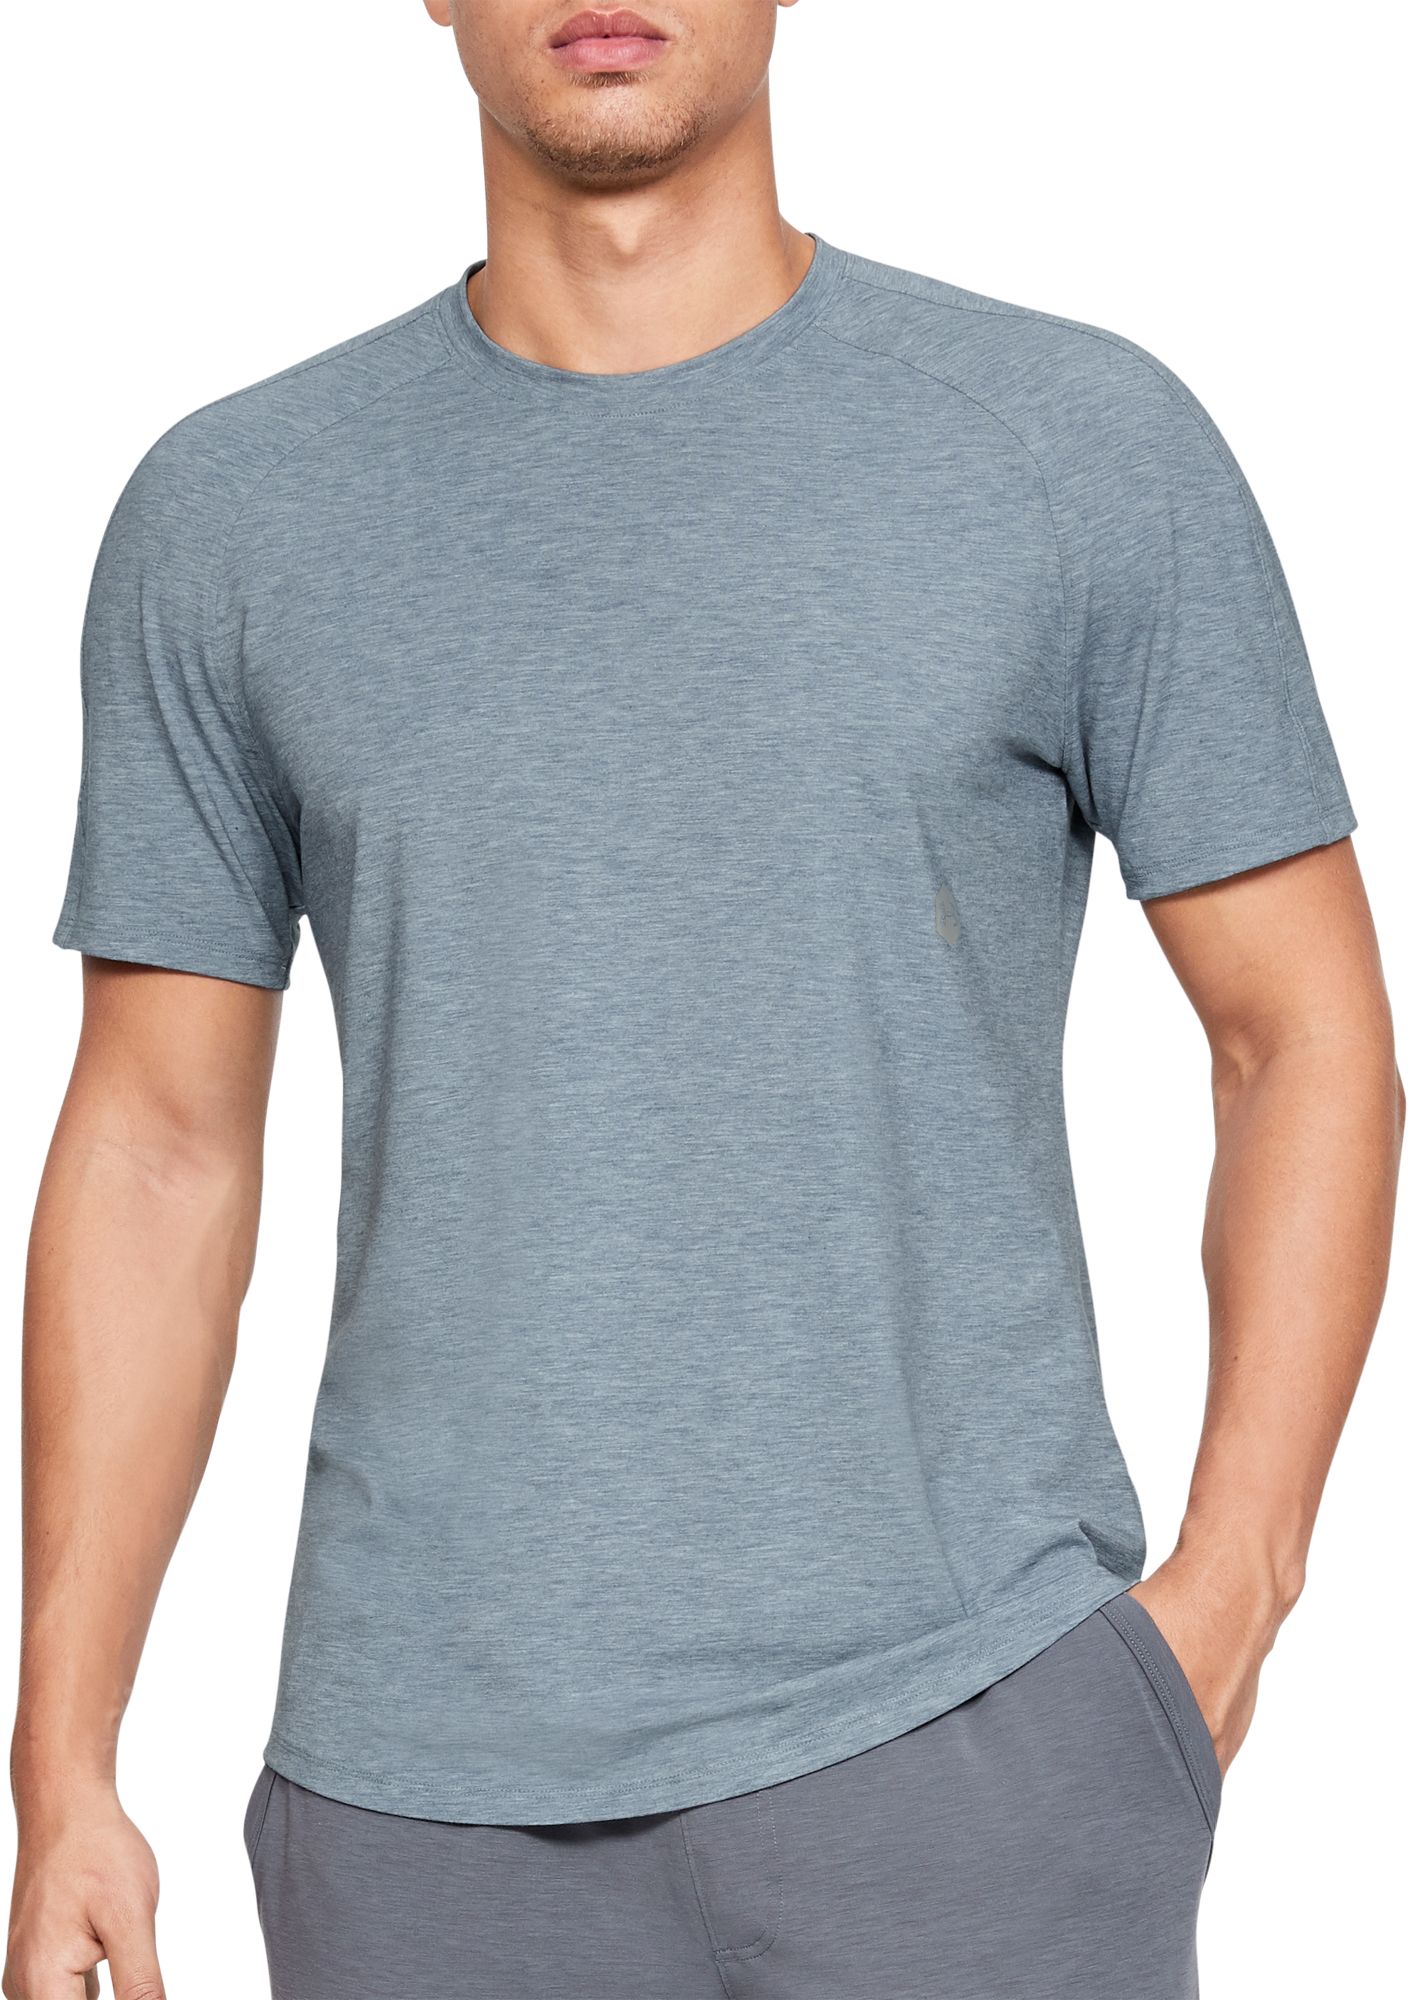 Athlete Recovery Travel T-Shirt 